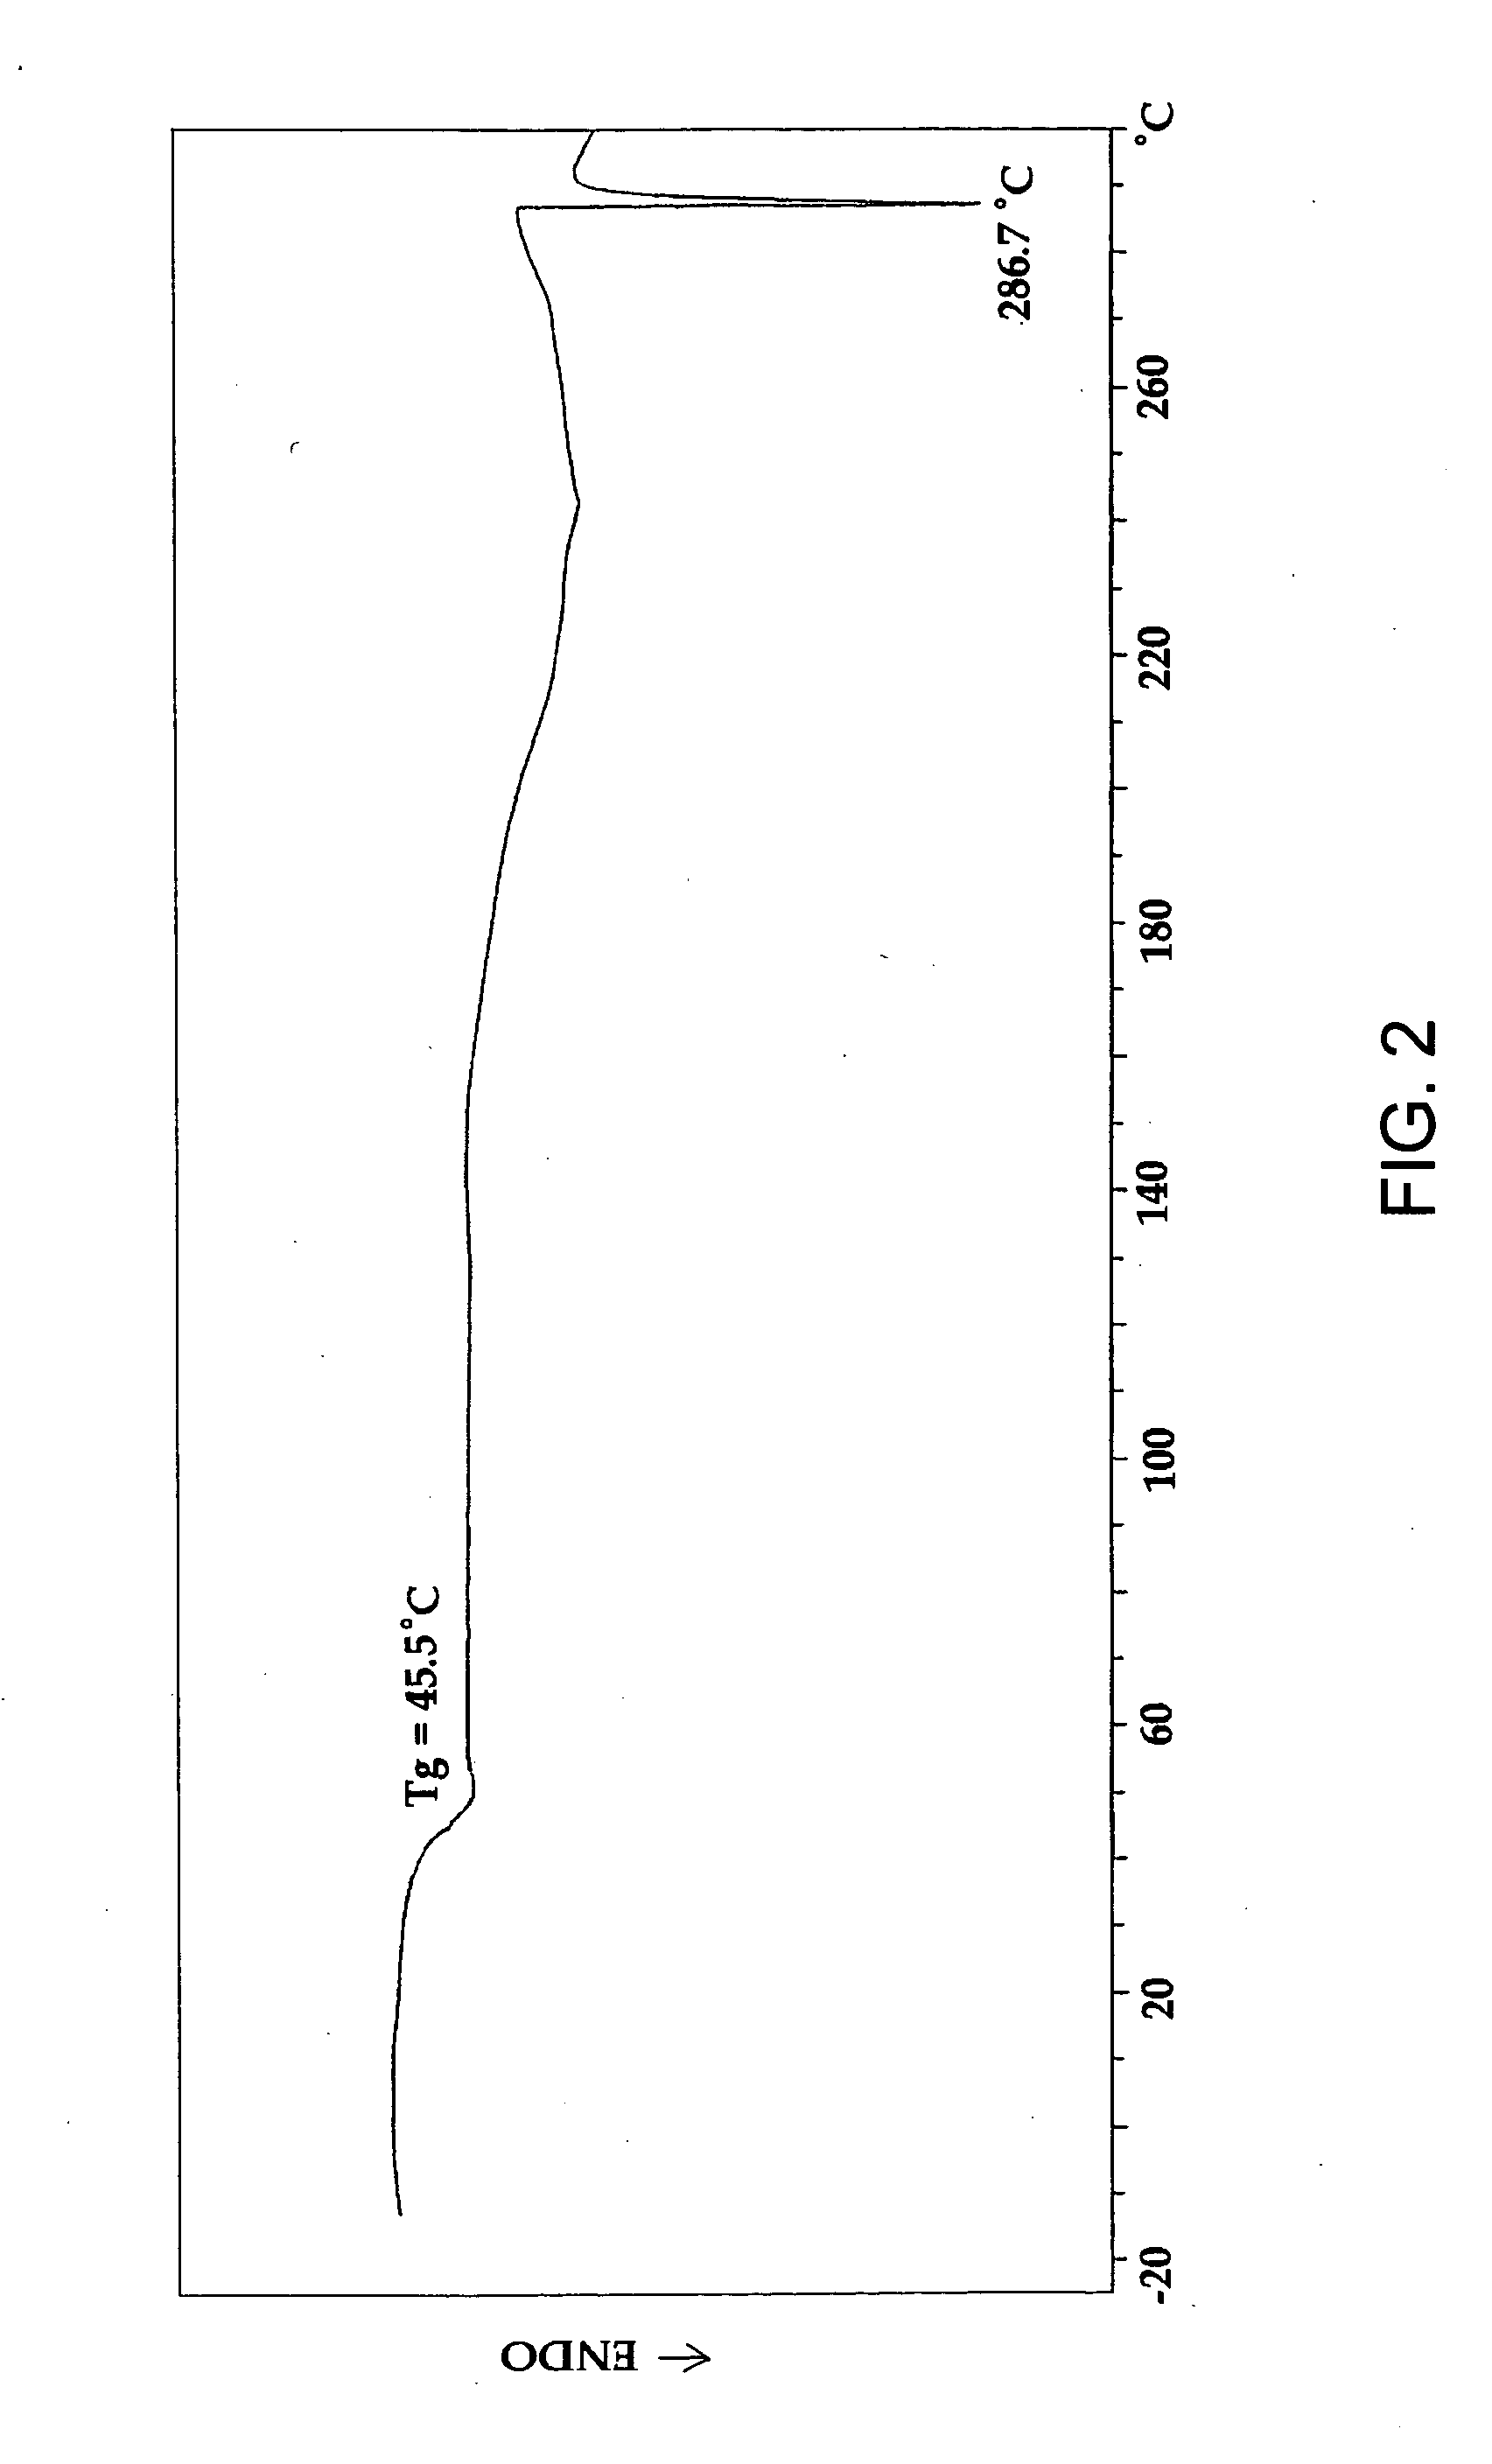 Aromatic di-acid-containing poly (ester amide) polymers and methods of use